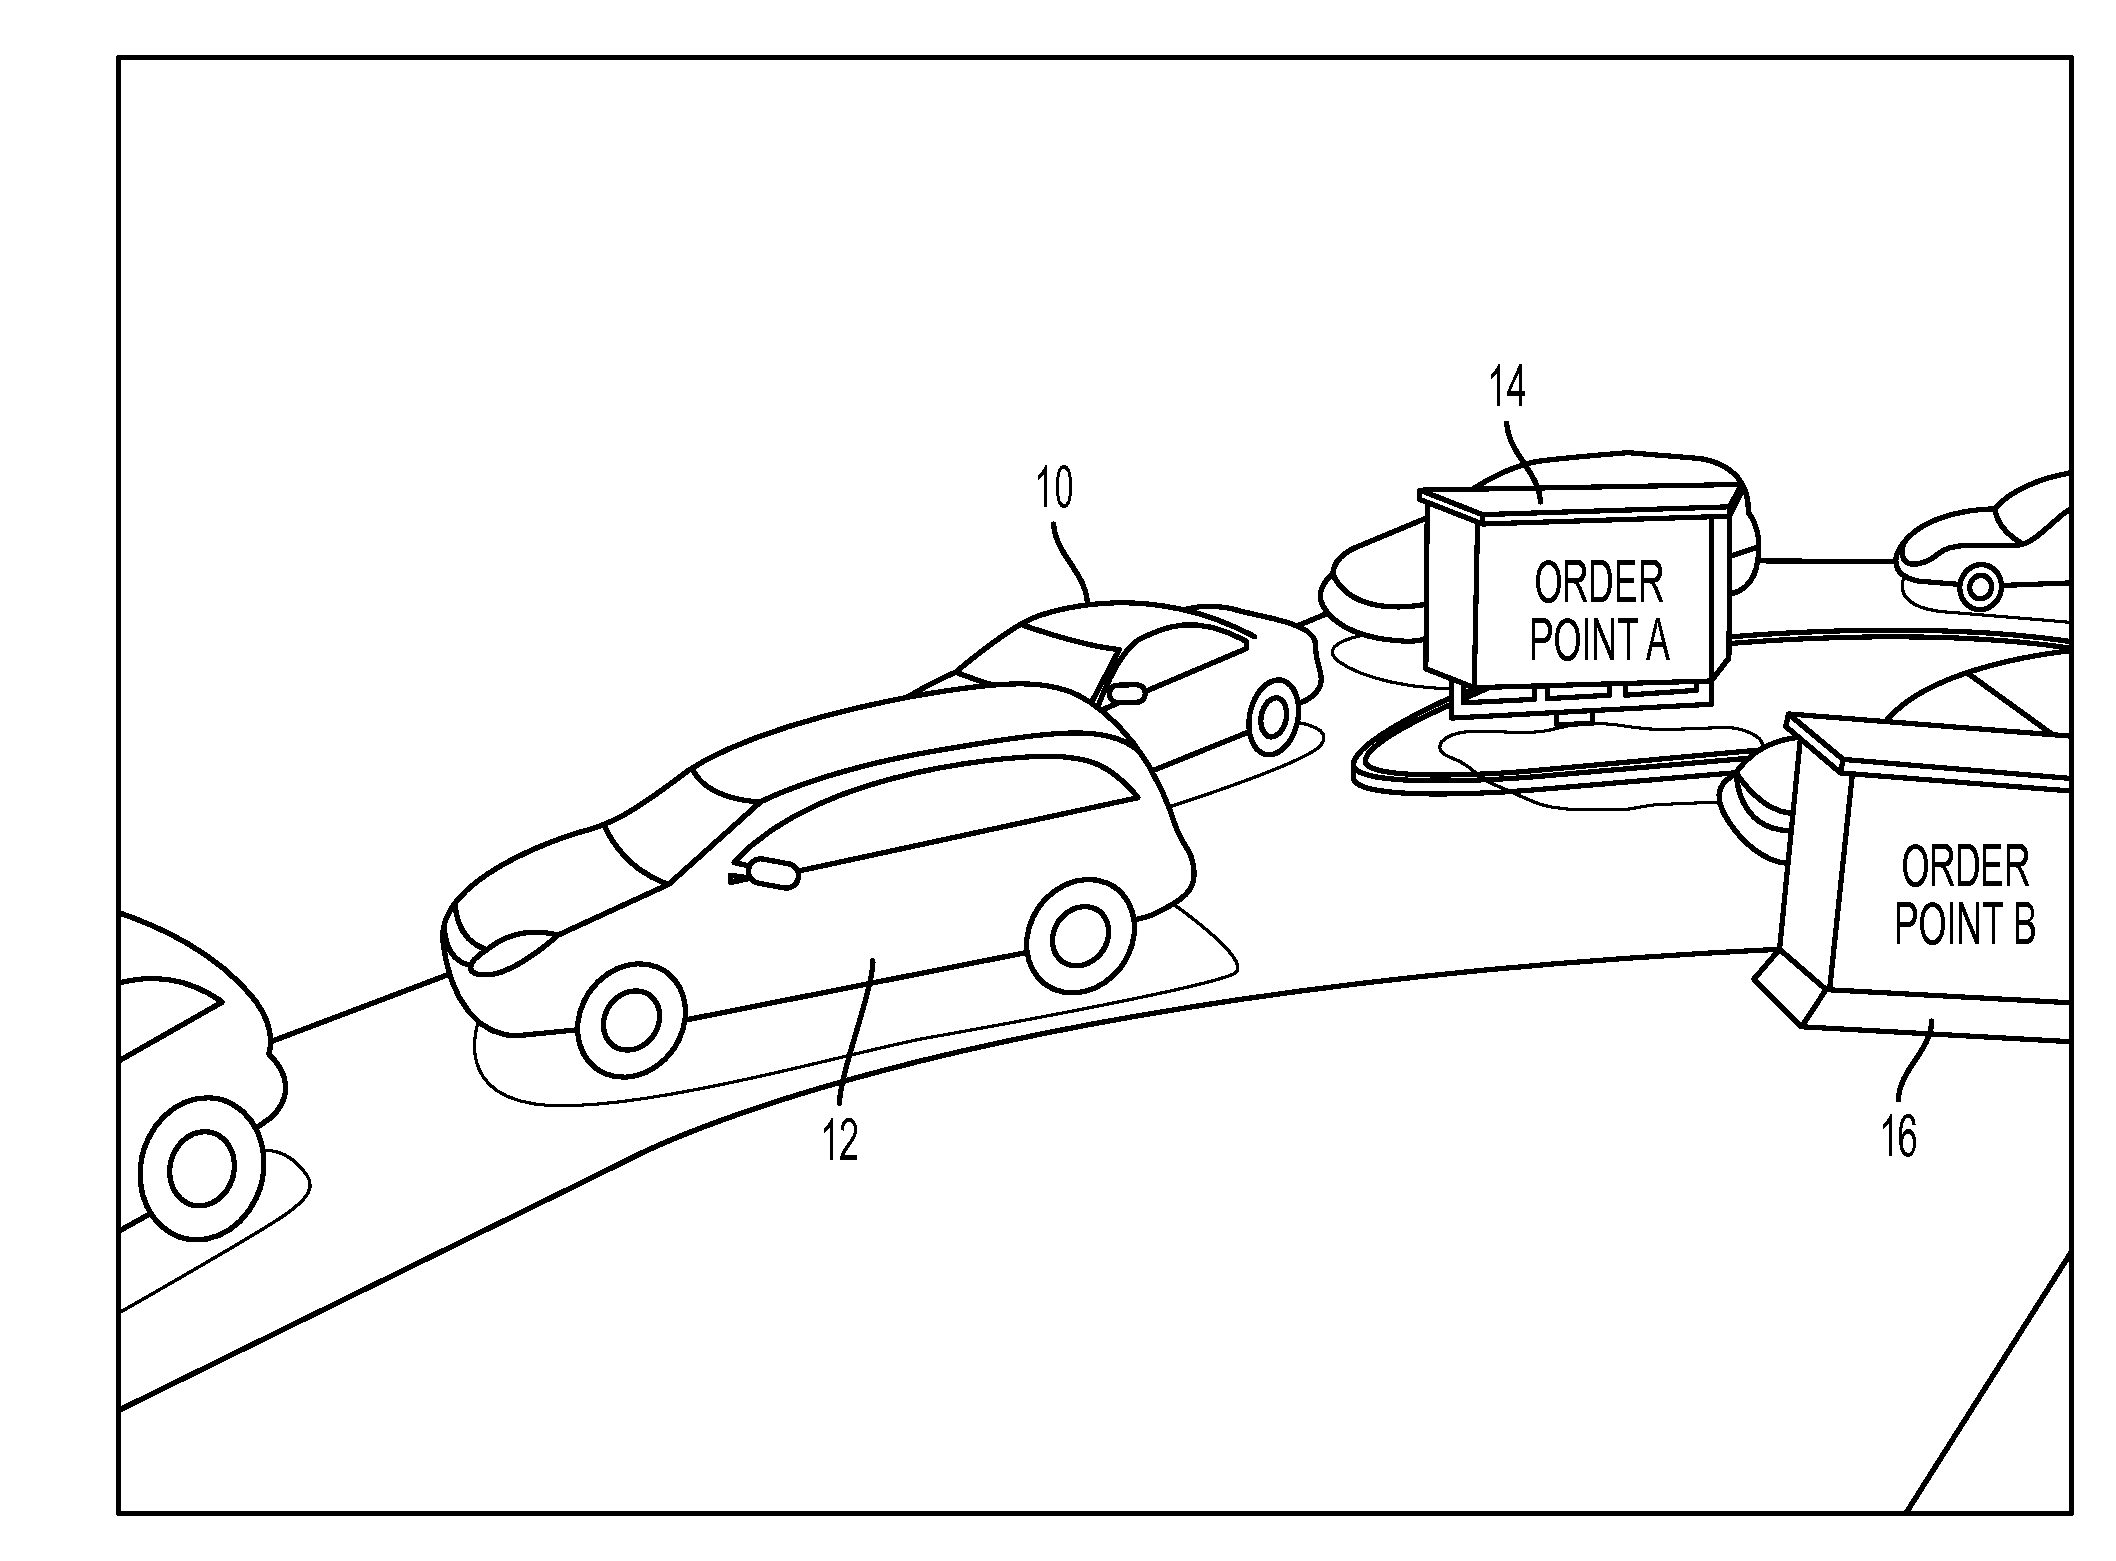 Method and system for automated sequencing of vehicles in side-by-side drive-thru configurations via appearance-based classification